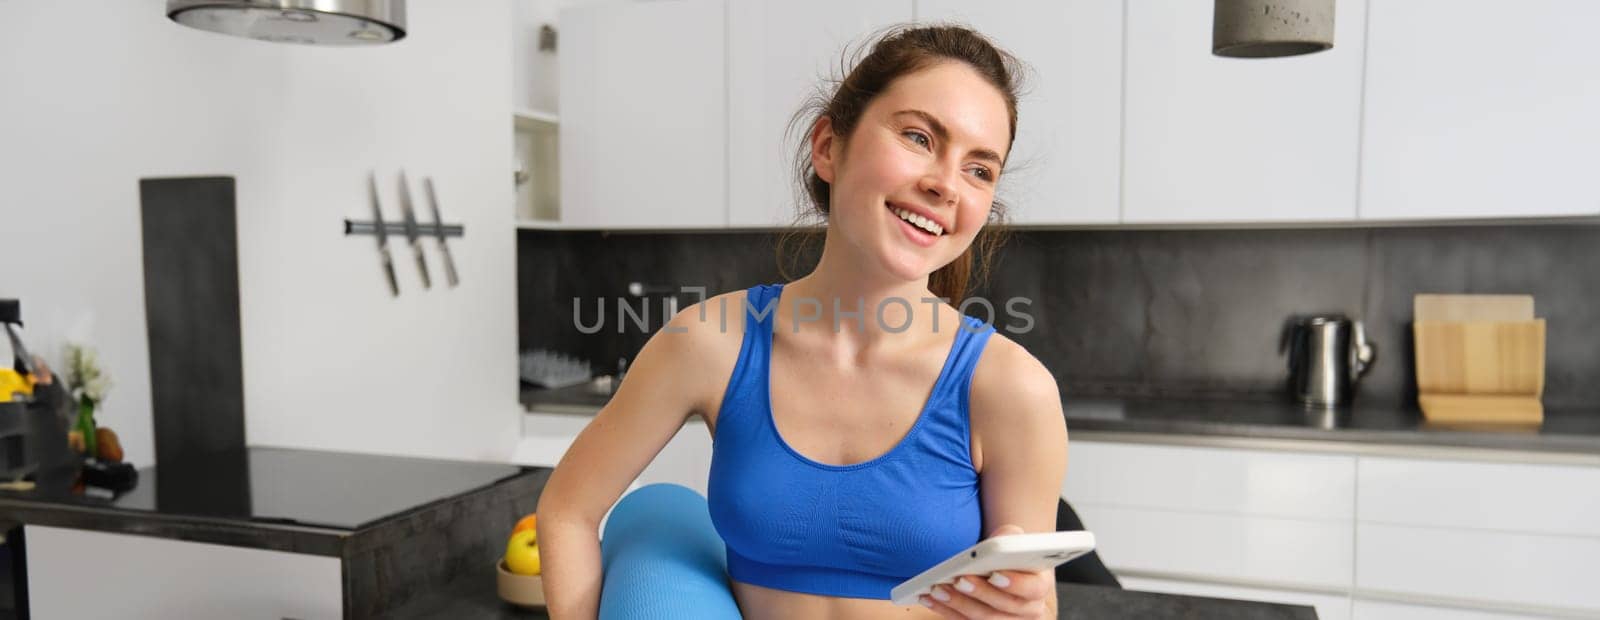 Portrait of fit and healthy woman doing workout at home, holding smartphone and rubber mat, smiling.